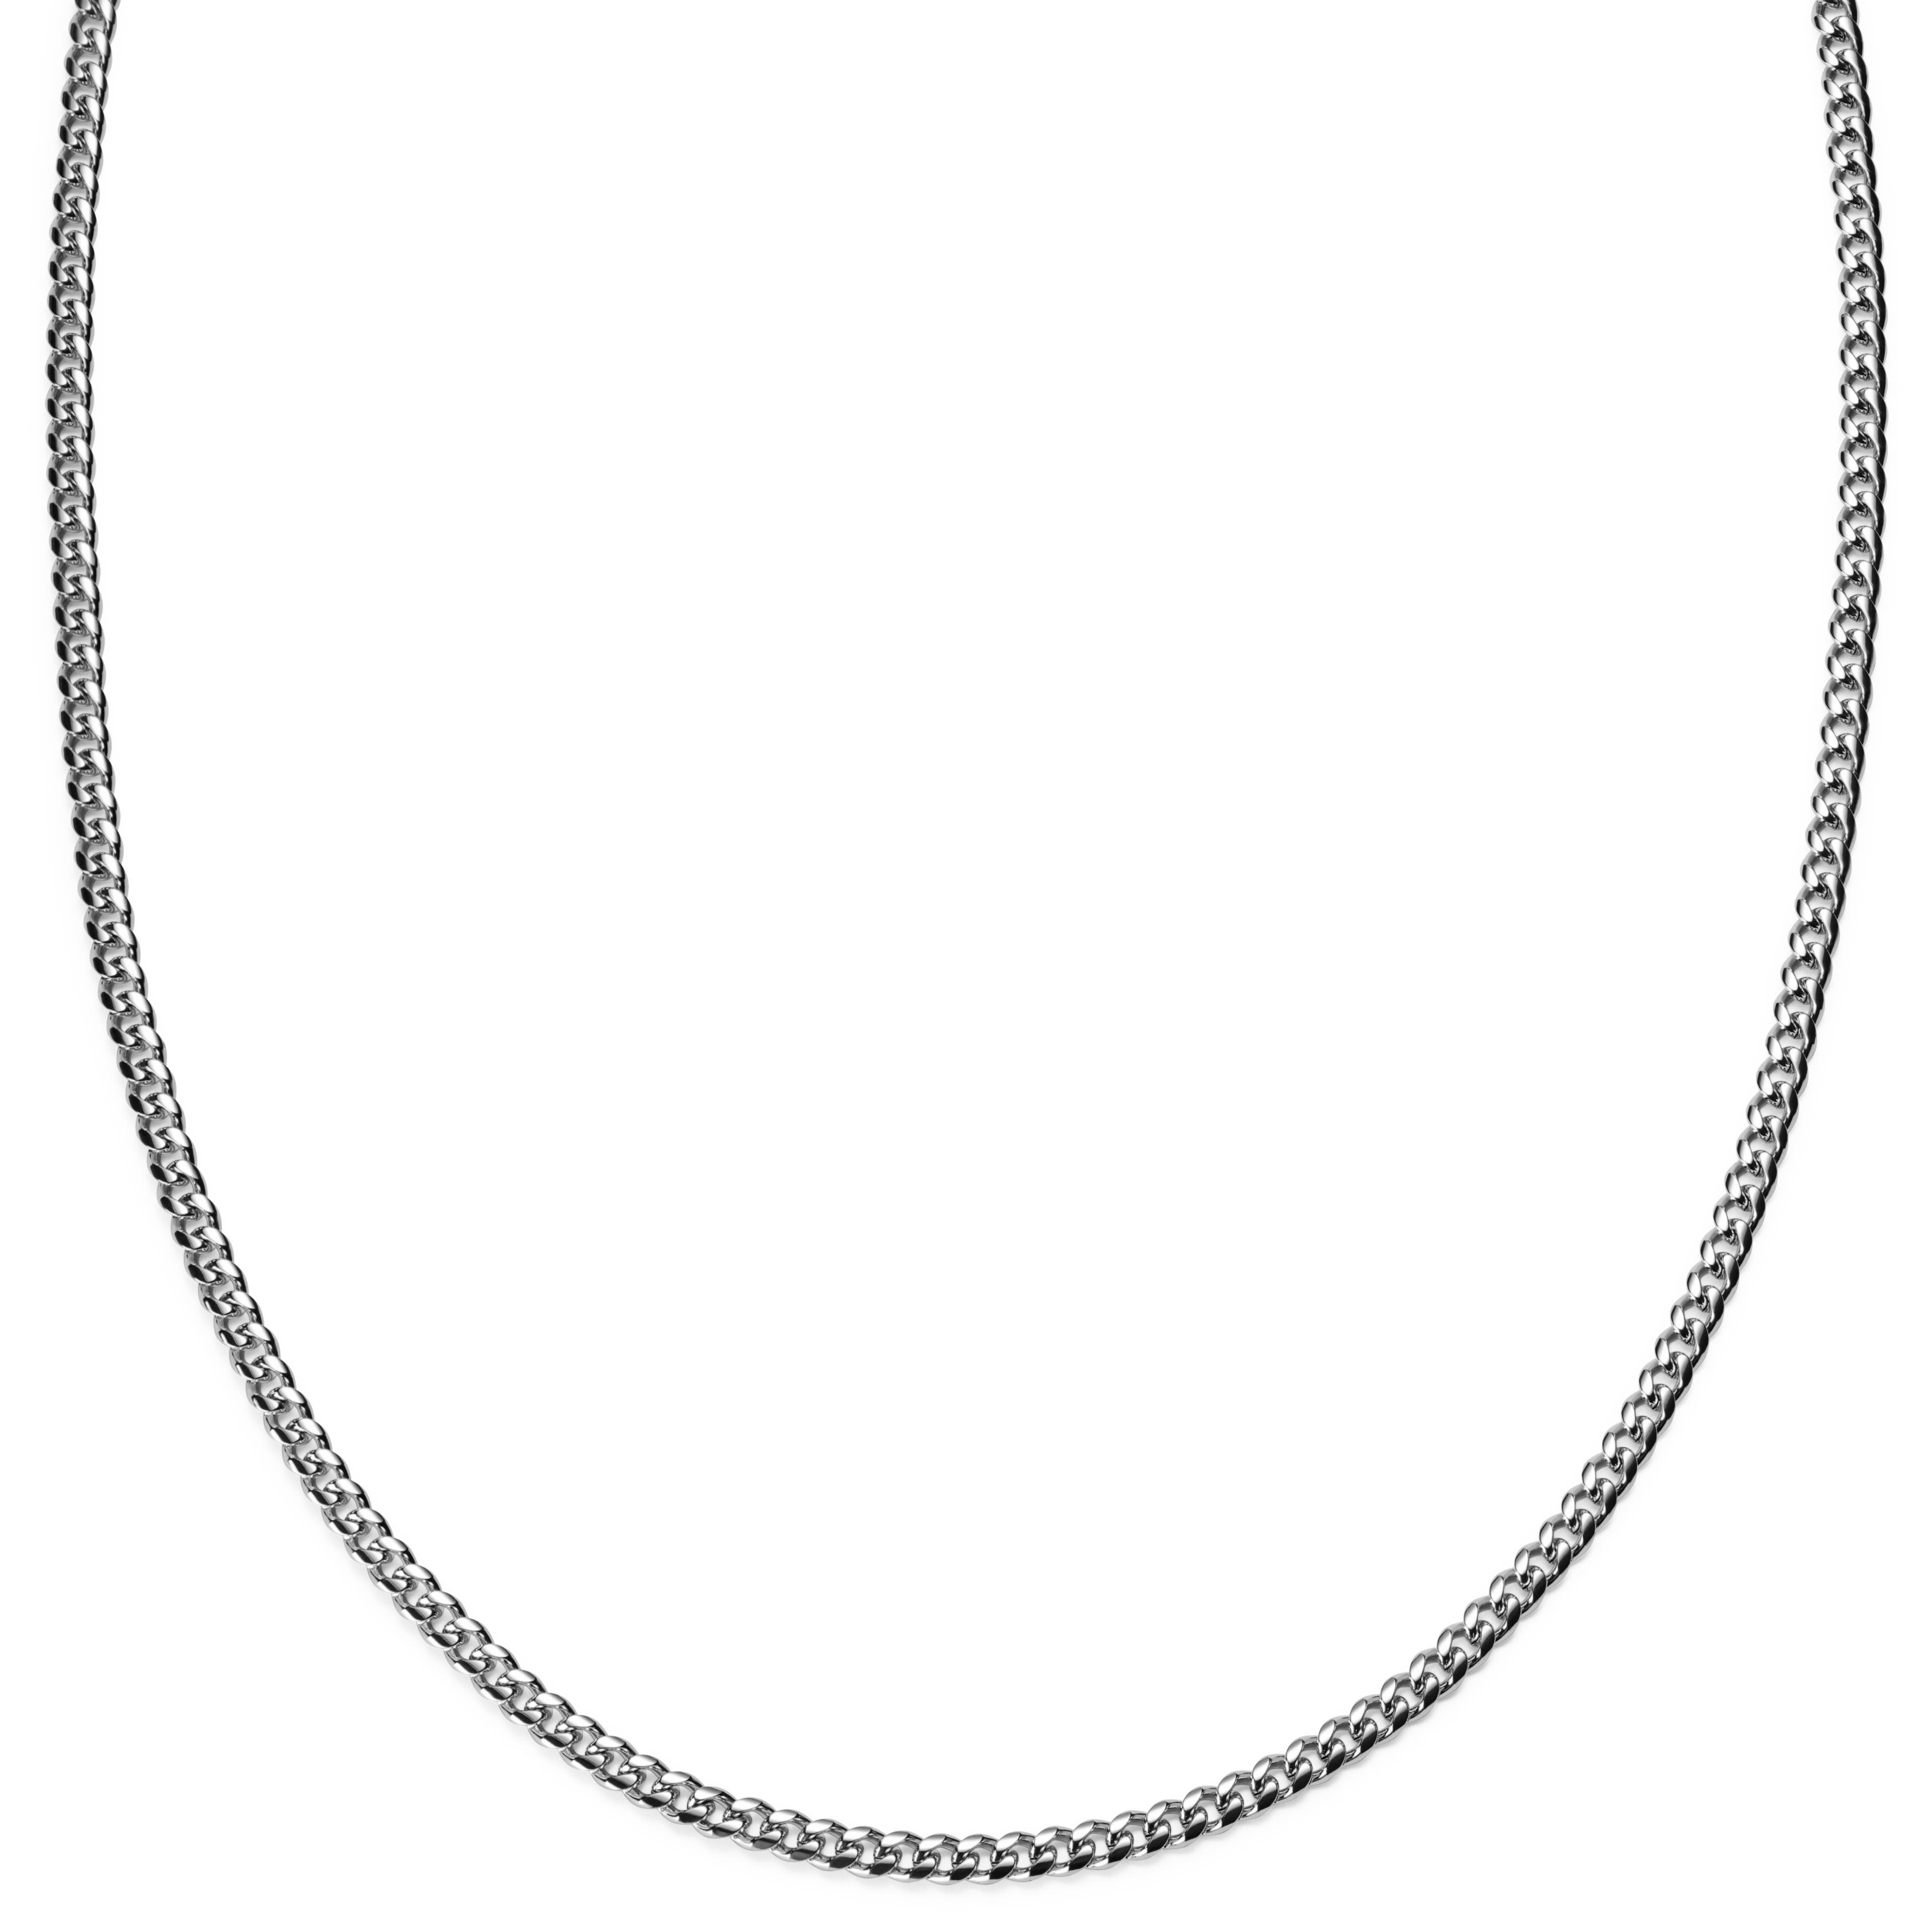 1/8" (3 mm) Silver-Tone Chain Necklace